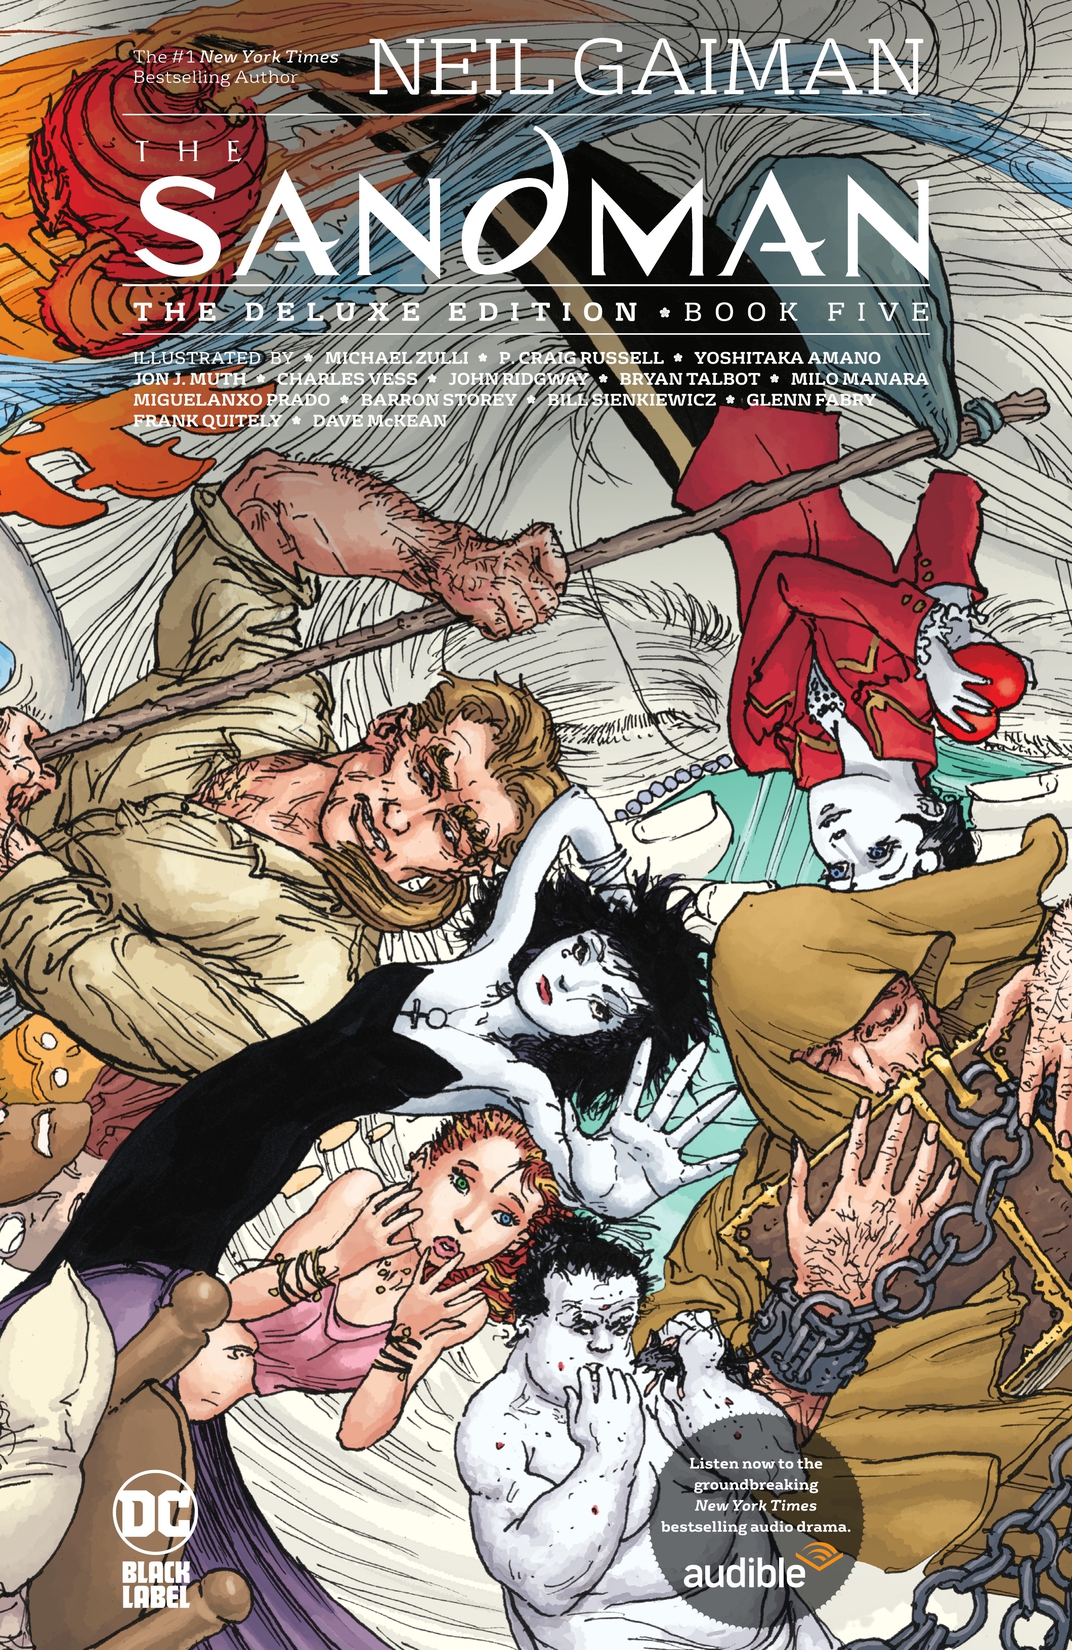 The Sandman: The Deluxe Edition Book Five preview images